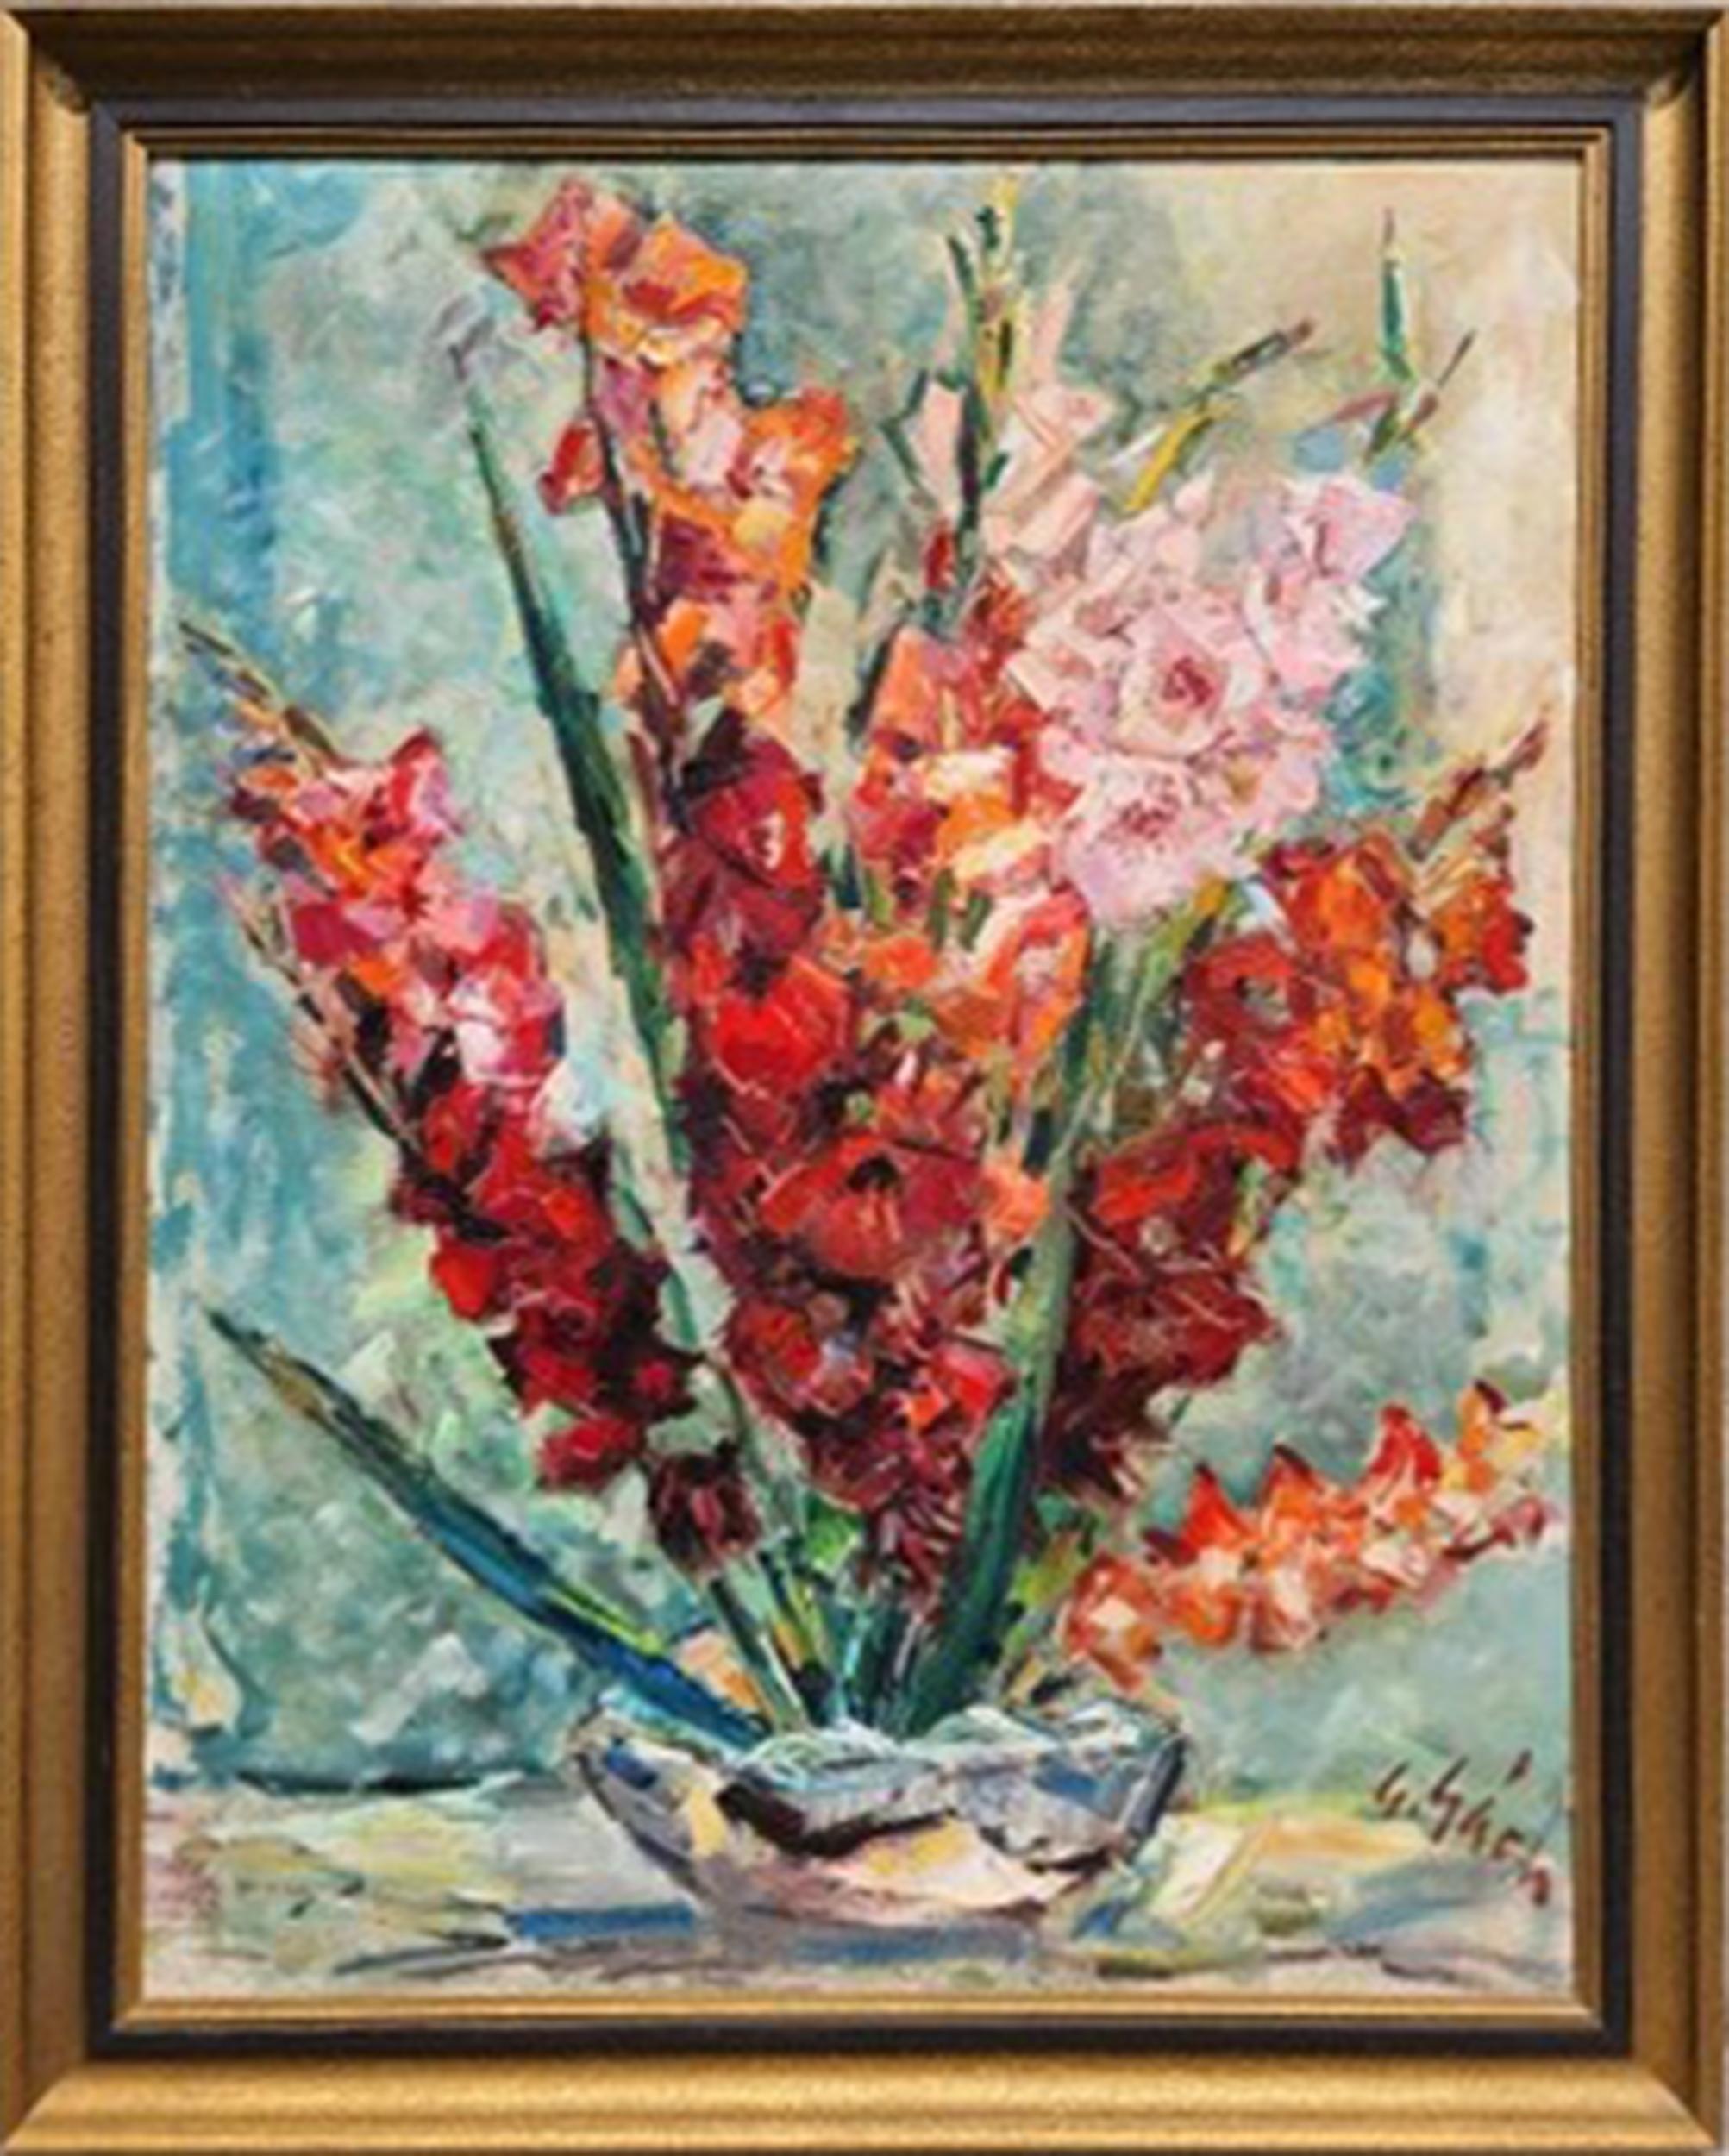 An impressionist still life painting of gladiolas flowers in a shallow vase by Hungarian artist George Gach.

Gladiolas
George Gách, Hungarian (1909–1996)
Date: 1961
Oil on Canvas, signed lower right
Size: 32.5 x 24.5 in. (82.55 x 62.23 cm)
Frame